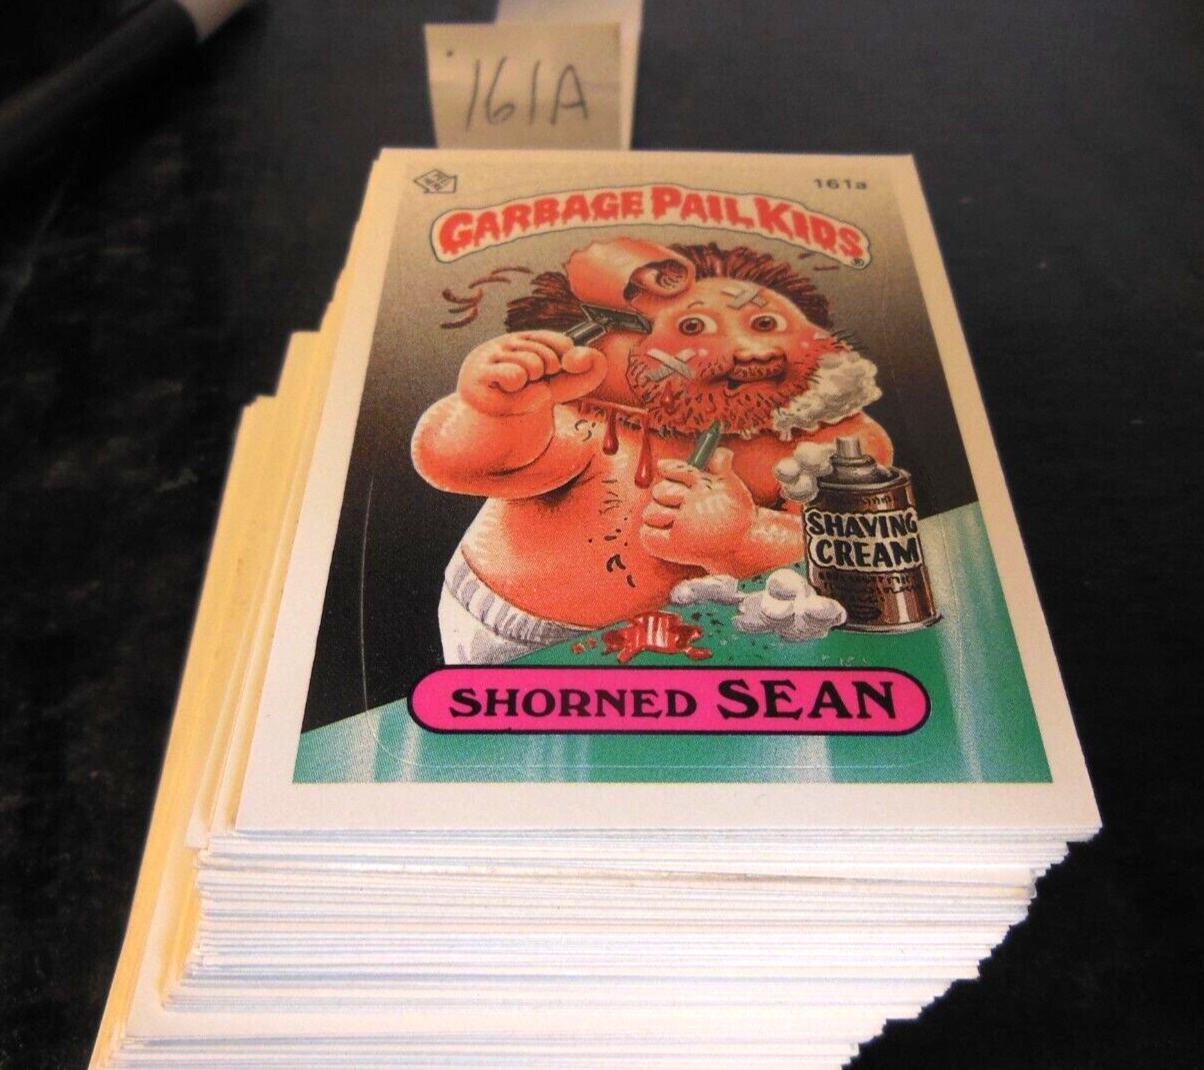 1986 Topps Garbage Pail Kids #161a SHORNED SEAN (LOT OF 50) (ALL THE SAME CARD)